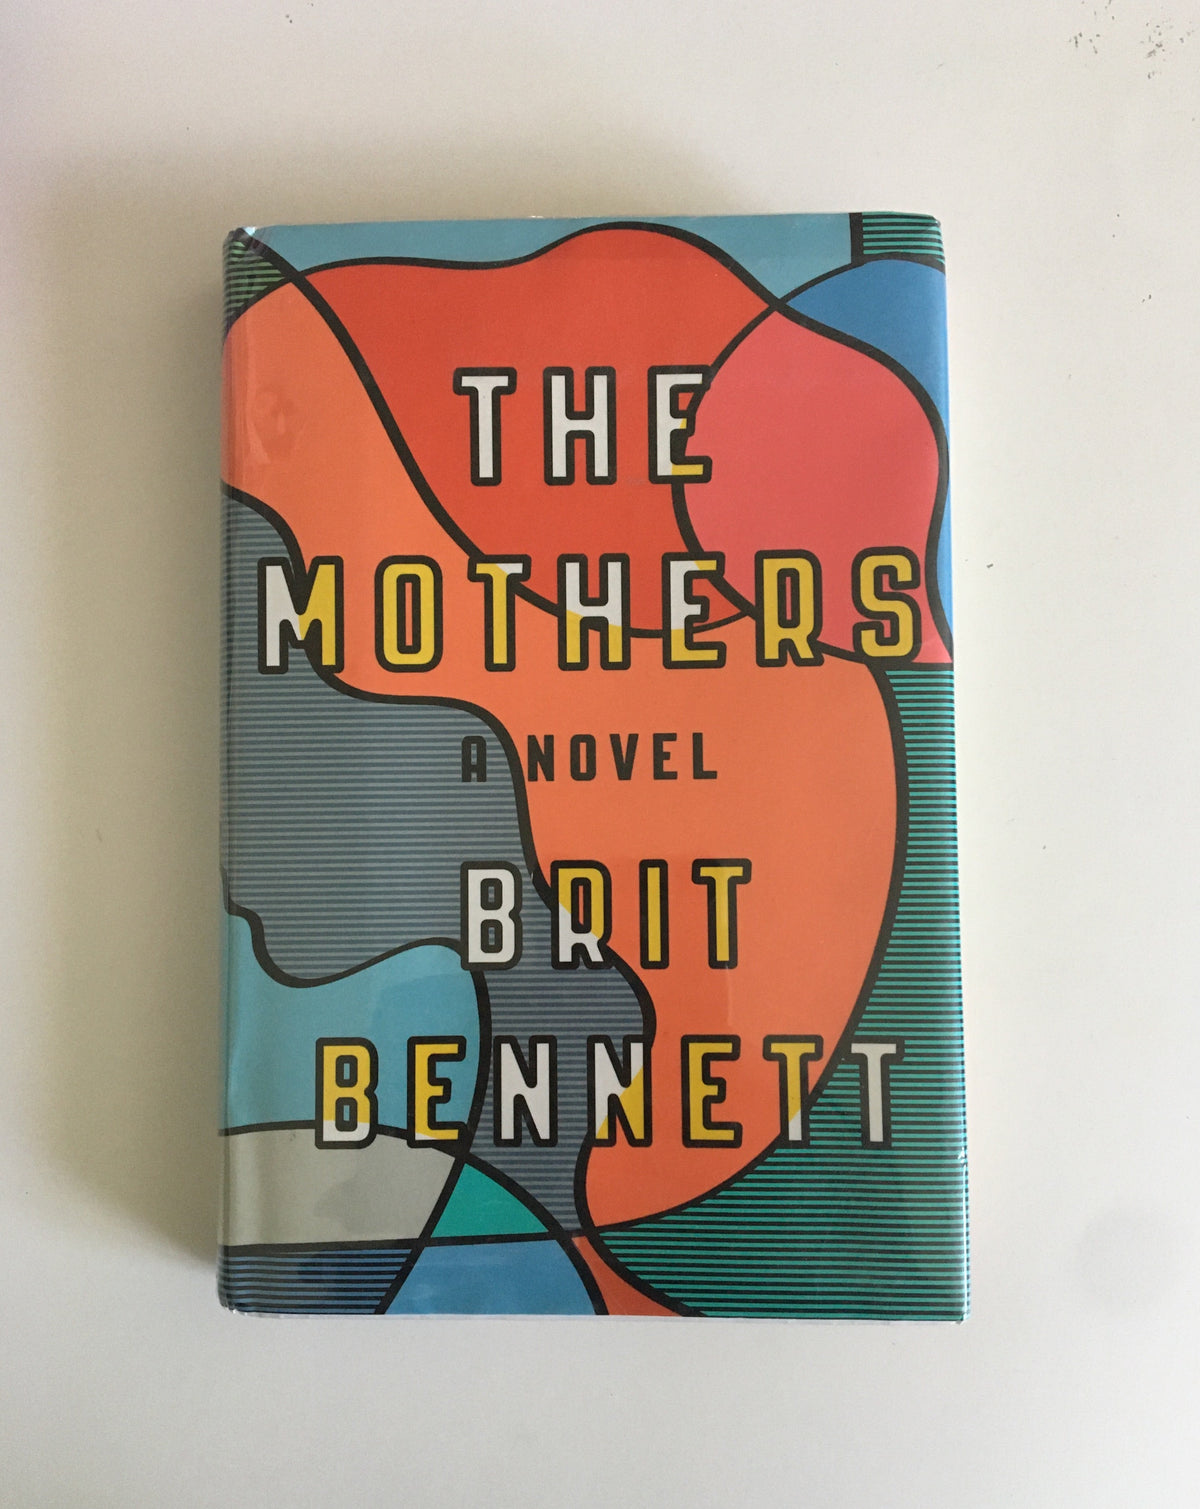 The Mothers by Brit Bennet